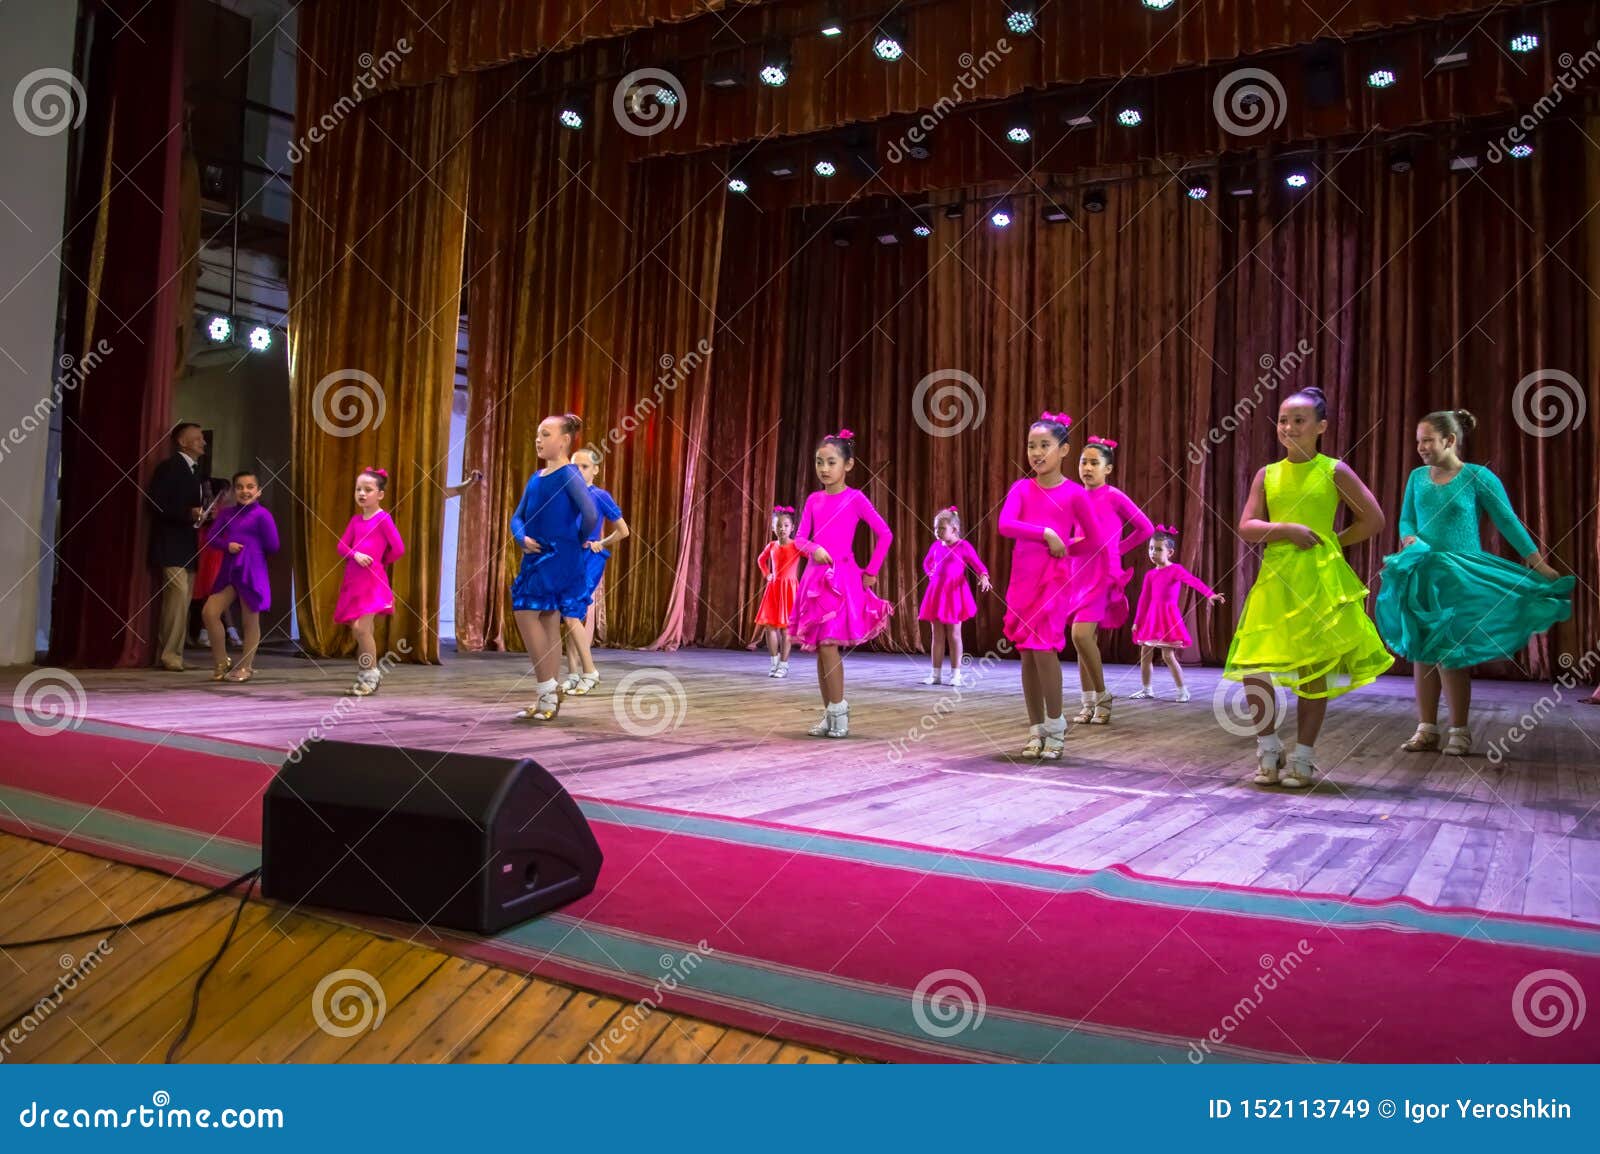 Dance School Pupils Take Exams Boys And Girls In Beautiful Dance Costumes On Stage Editorial Stock Image Image Of Child Health 152113749